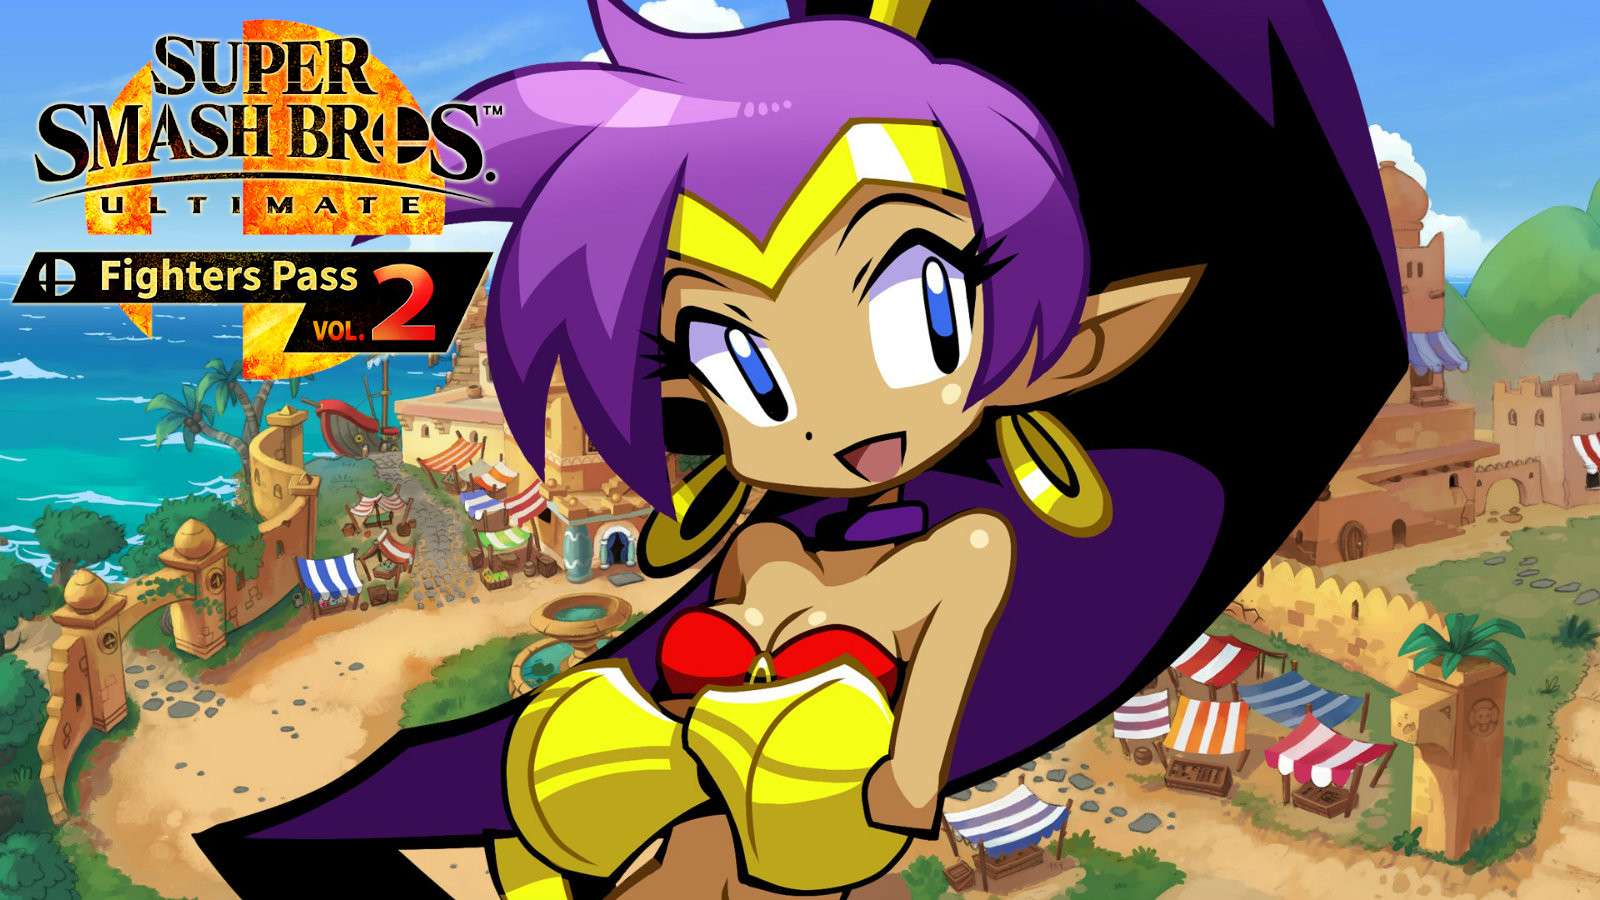 Shantae in Smash Ultimate Fighters Pass Volume 2